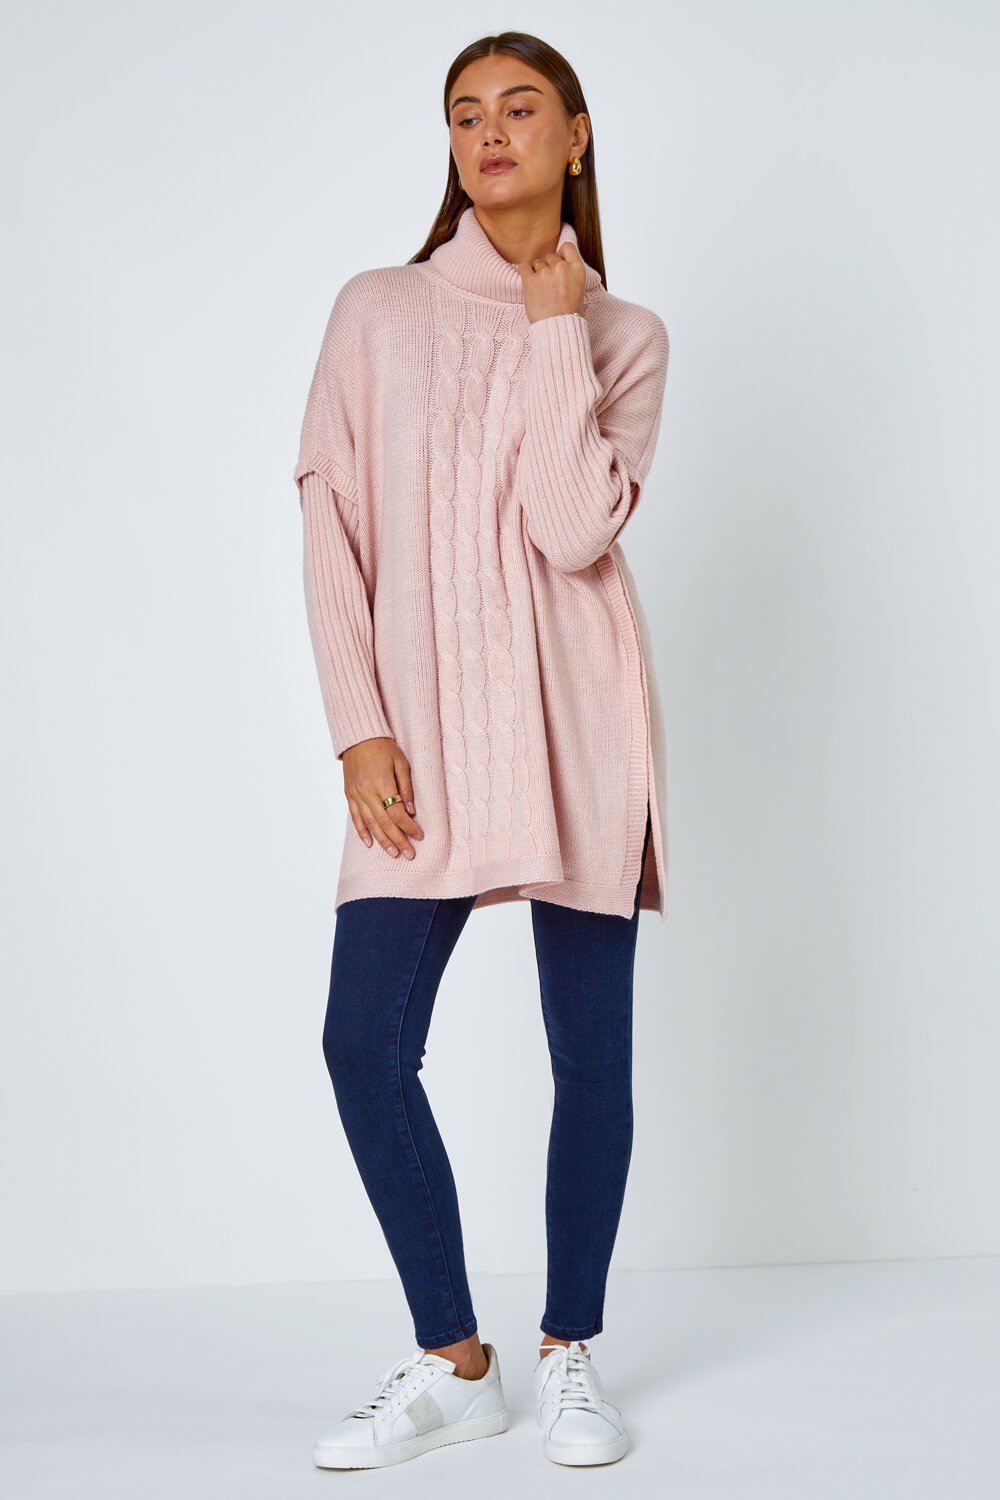 PINK Cable Knit Roll Neck Poncho Jumper, Image 2 of 5